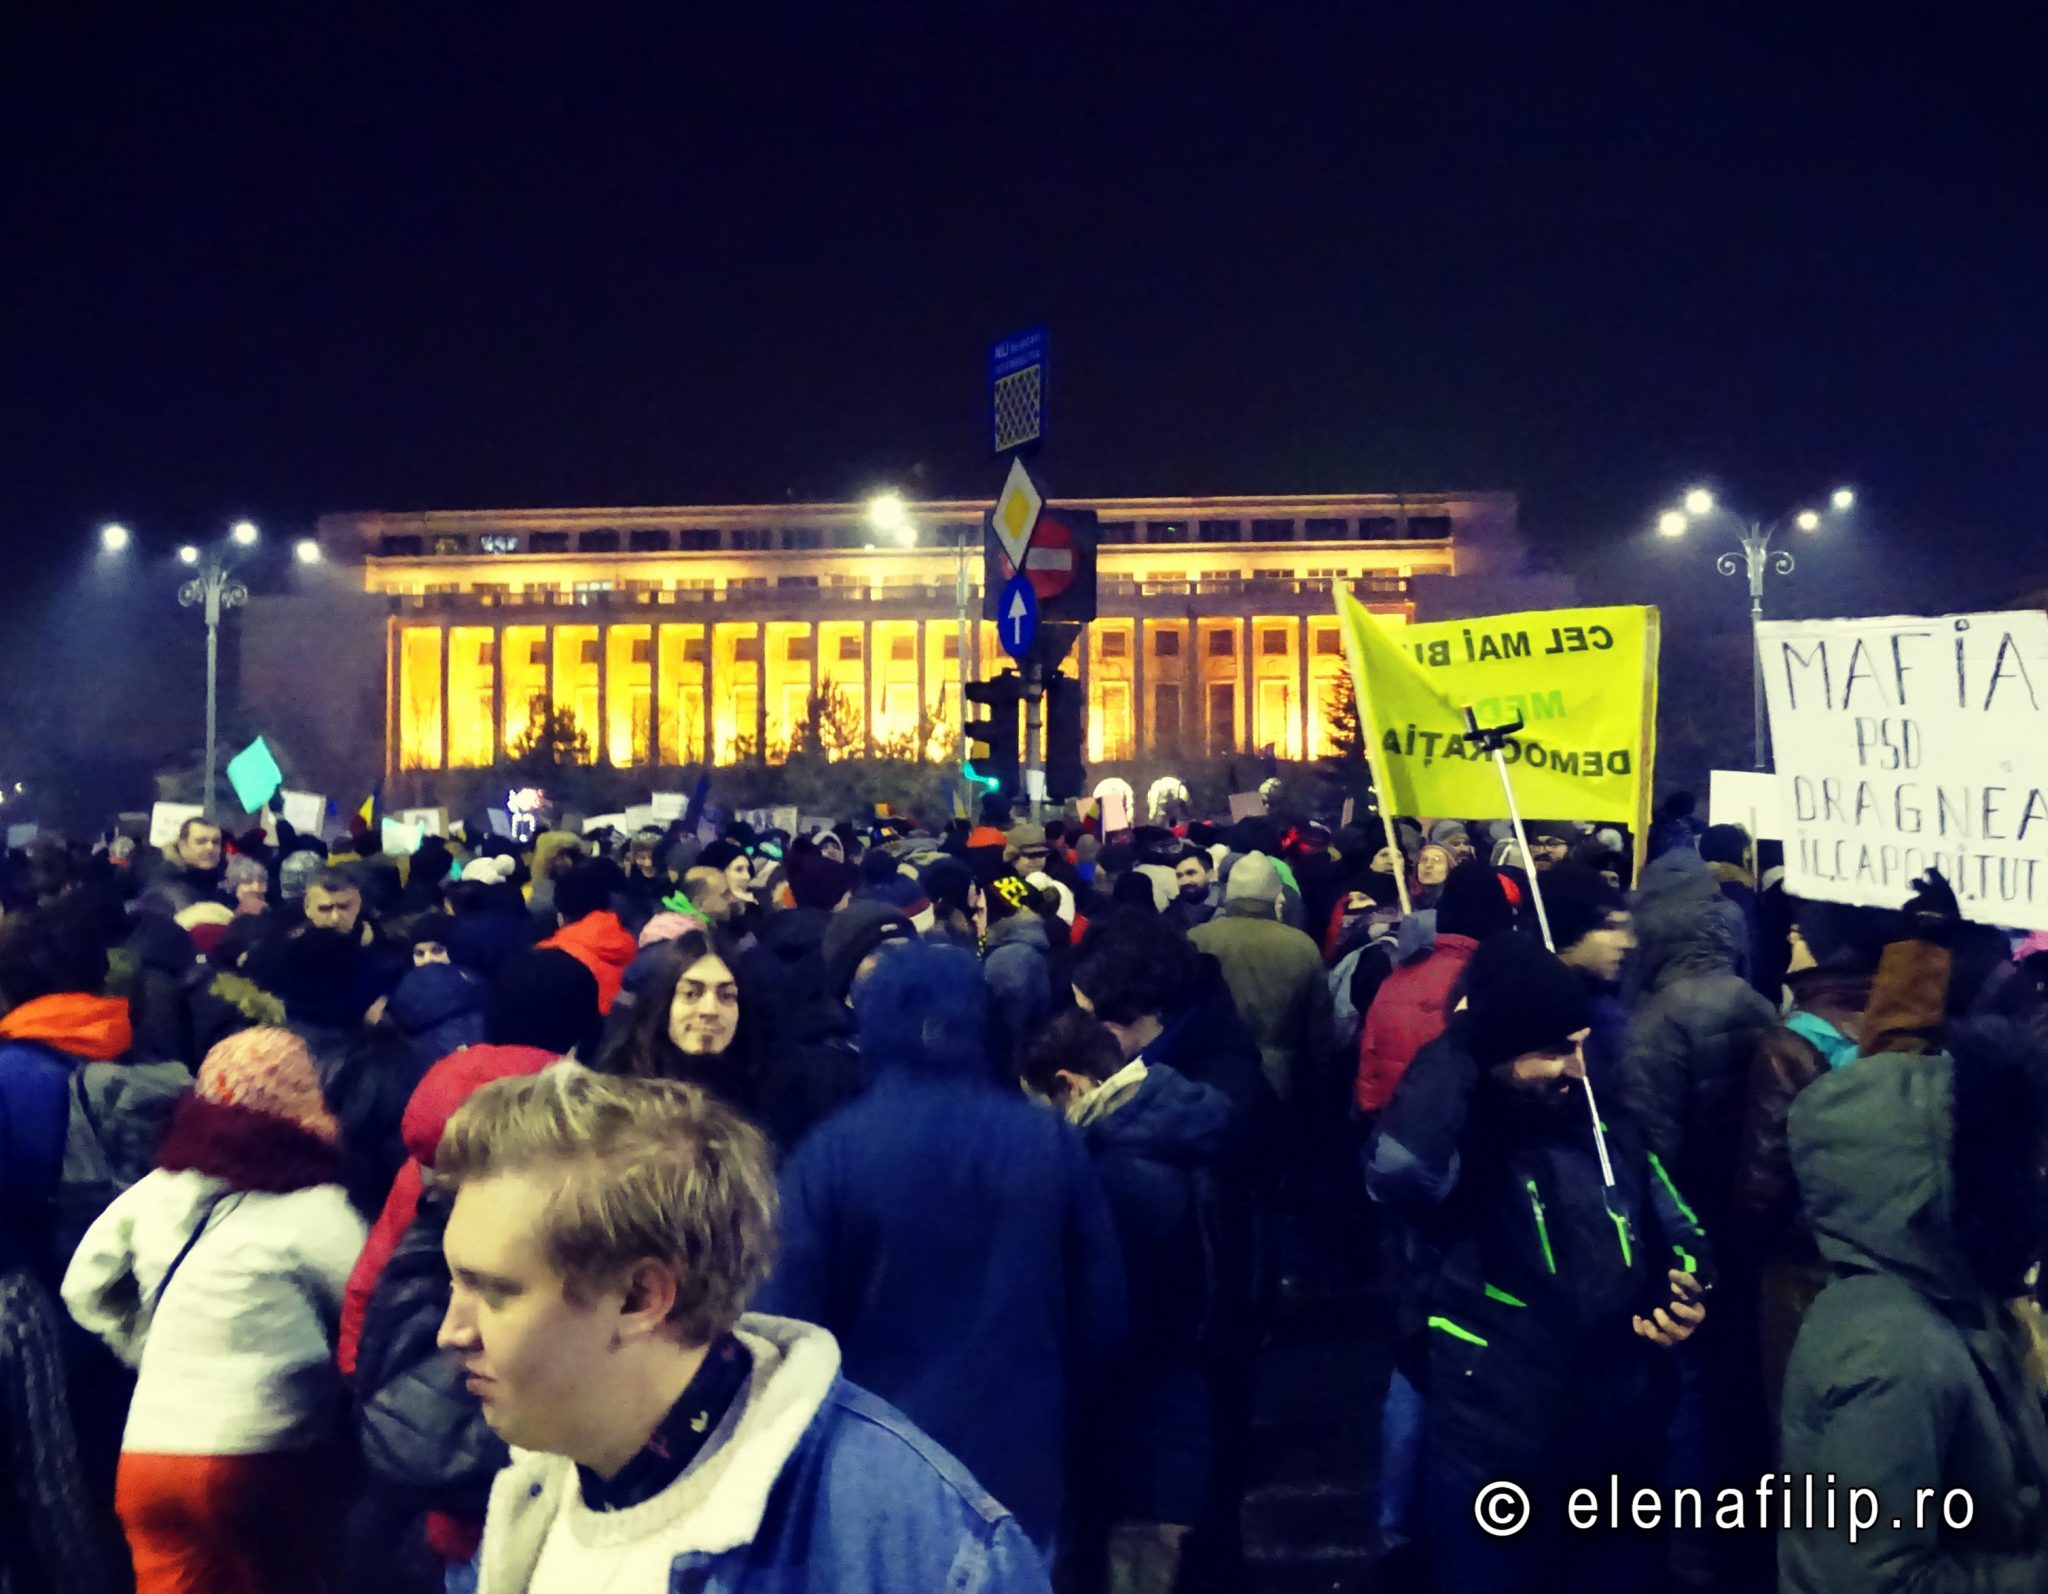 02.02.2017. Bucharest. 80.000 people. Emotional moments&funny messages. #Romania 